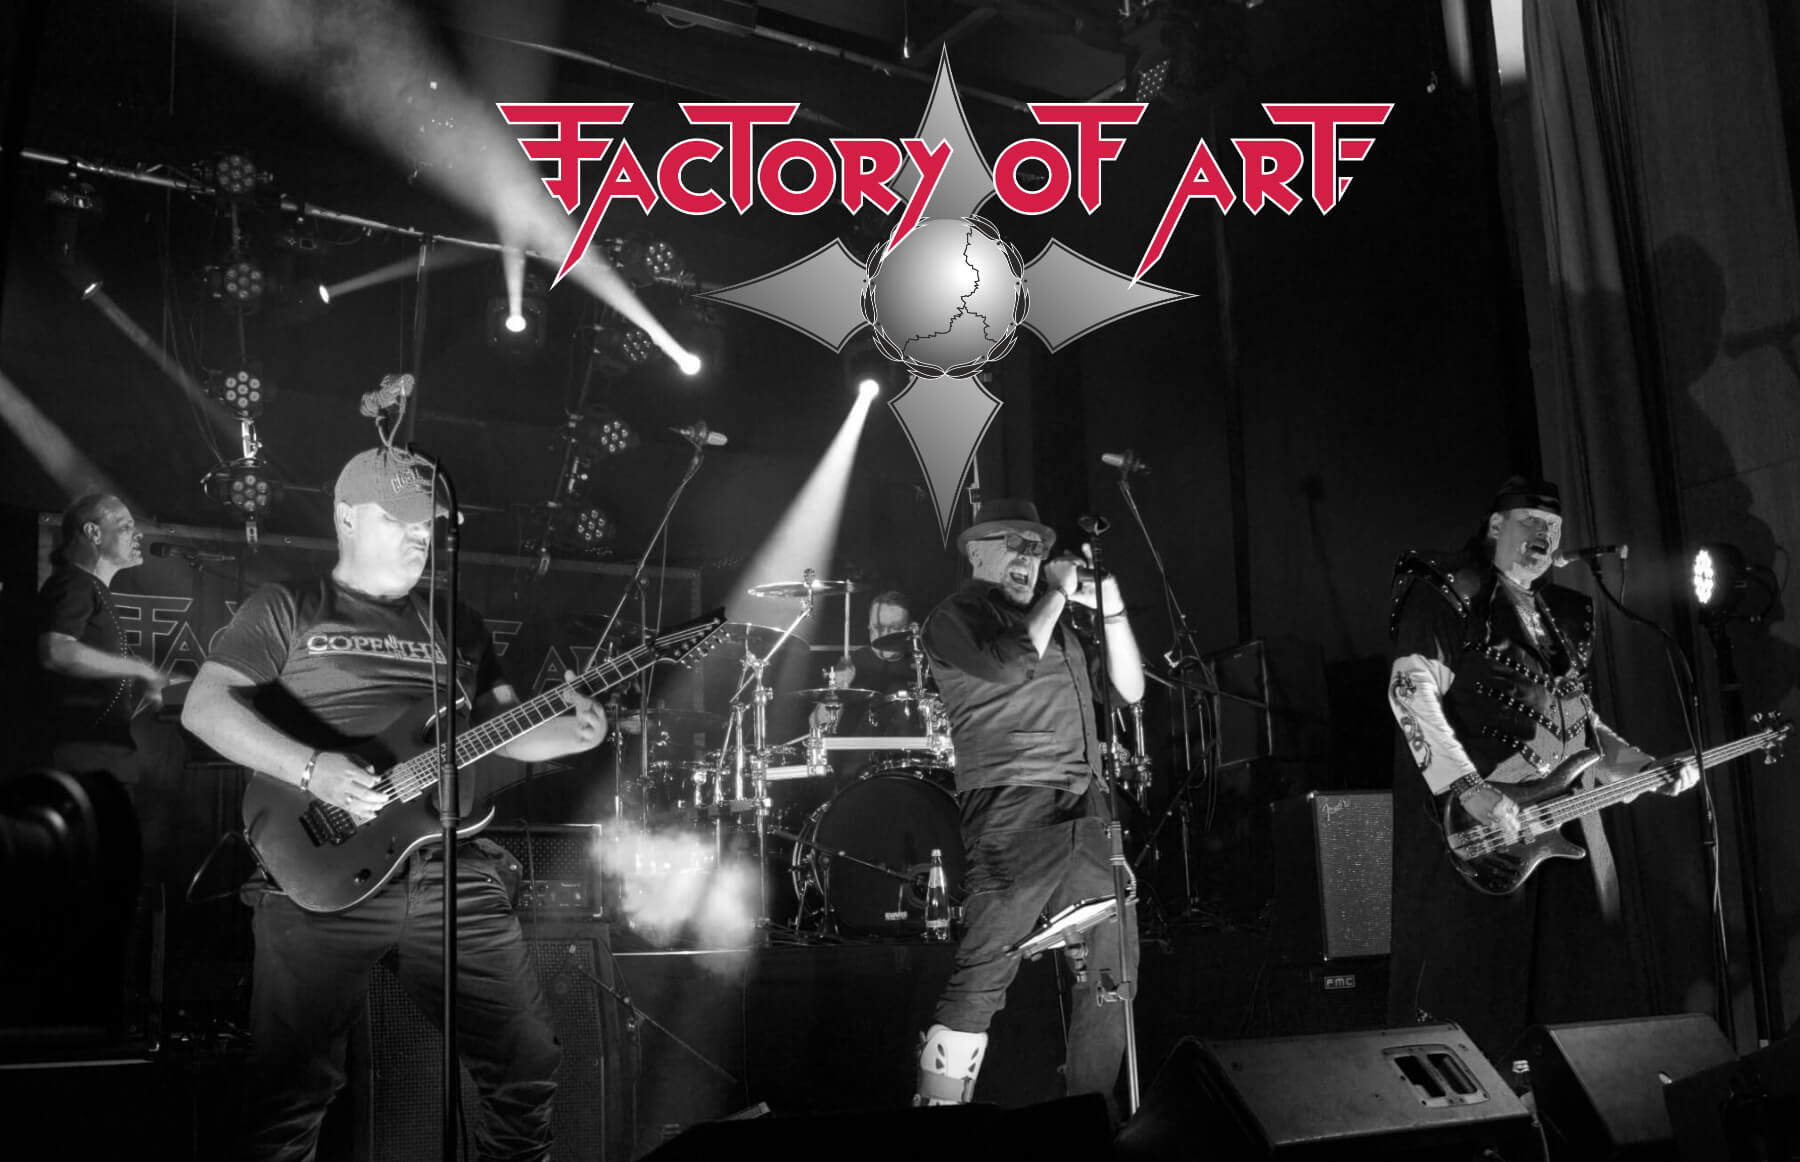 (c) Factory-of-art.band